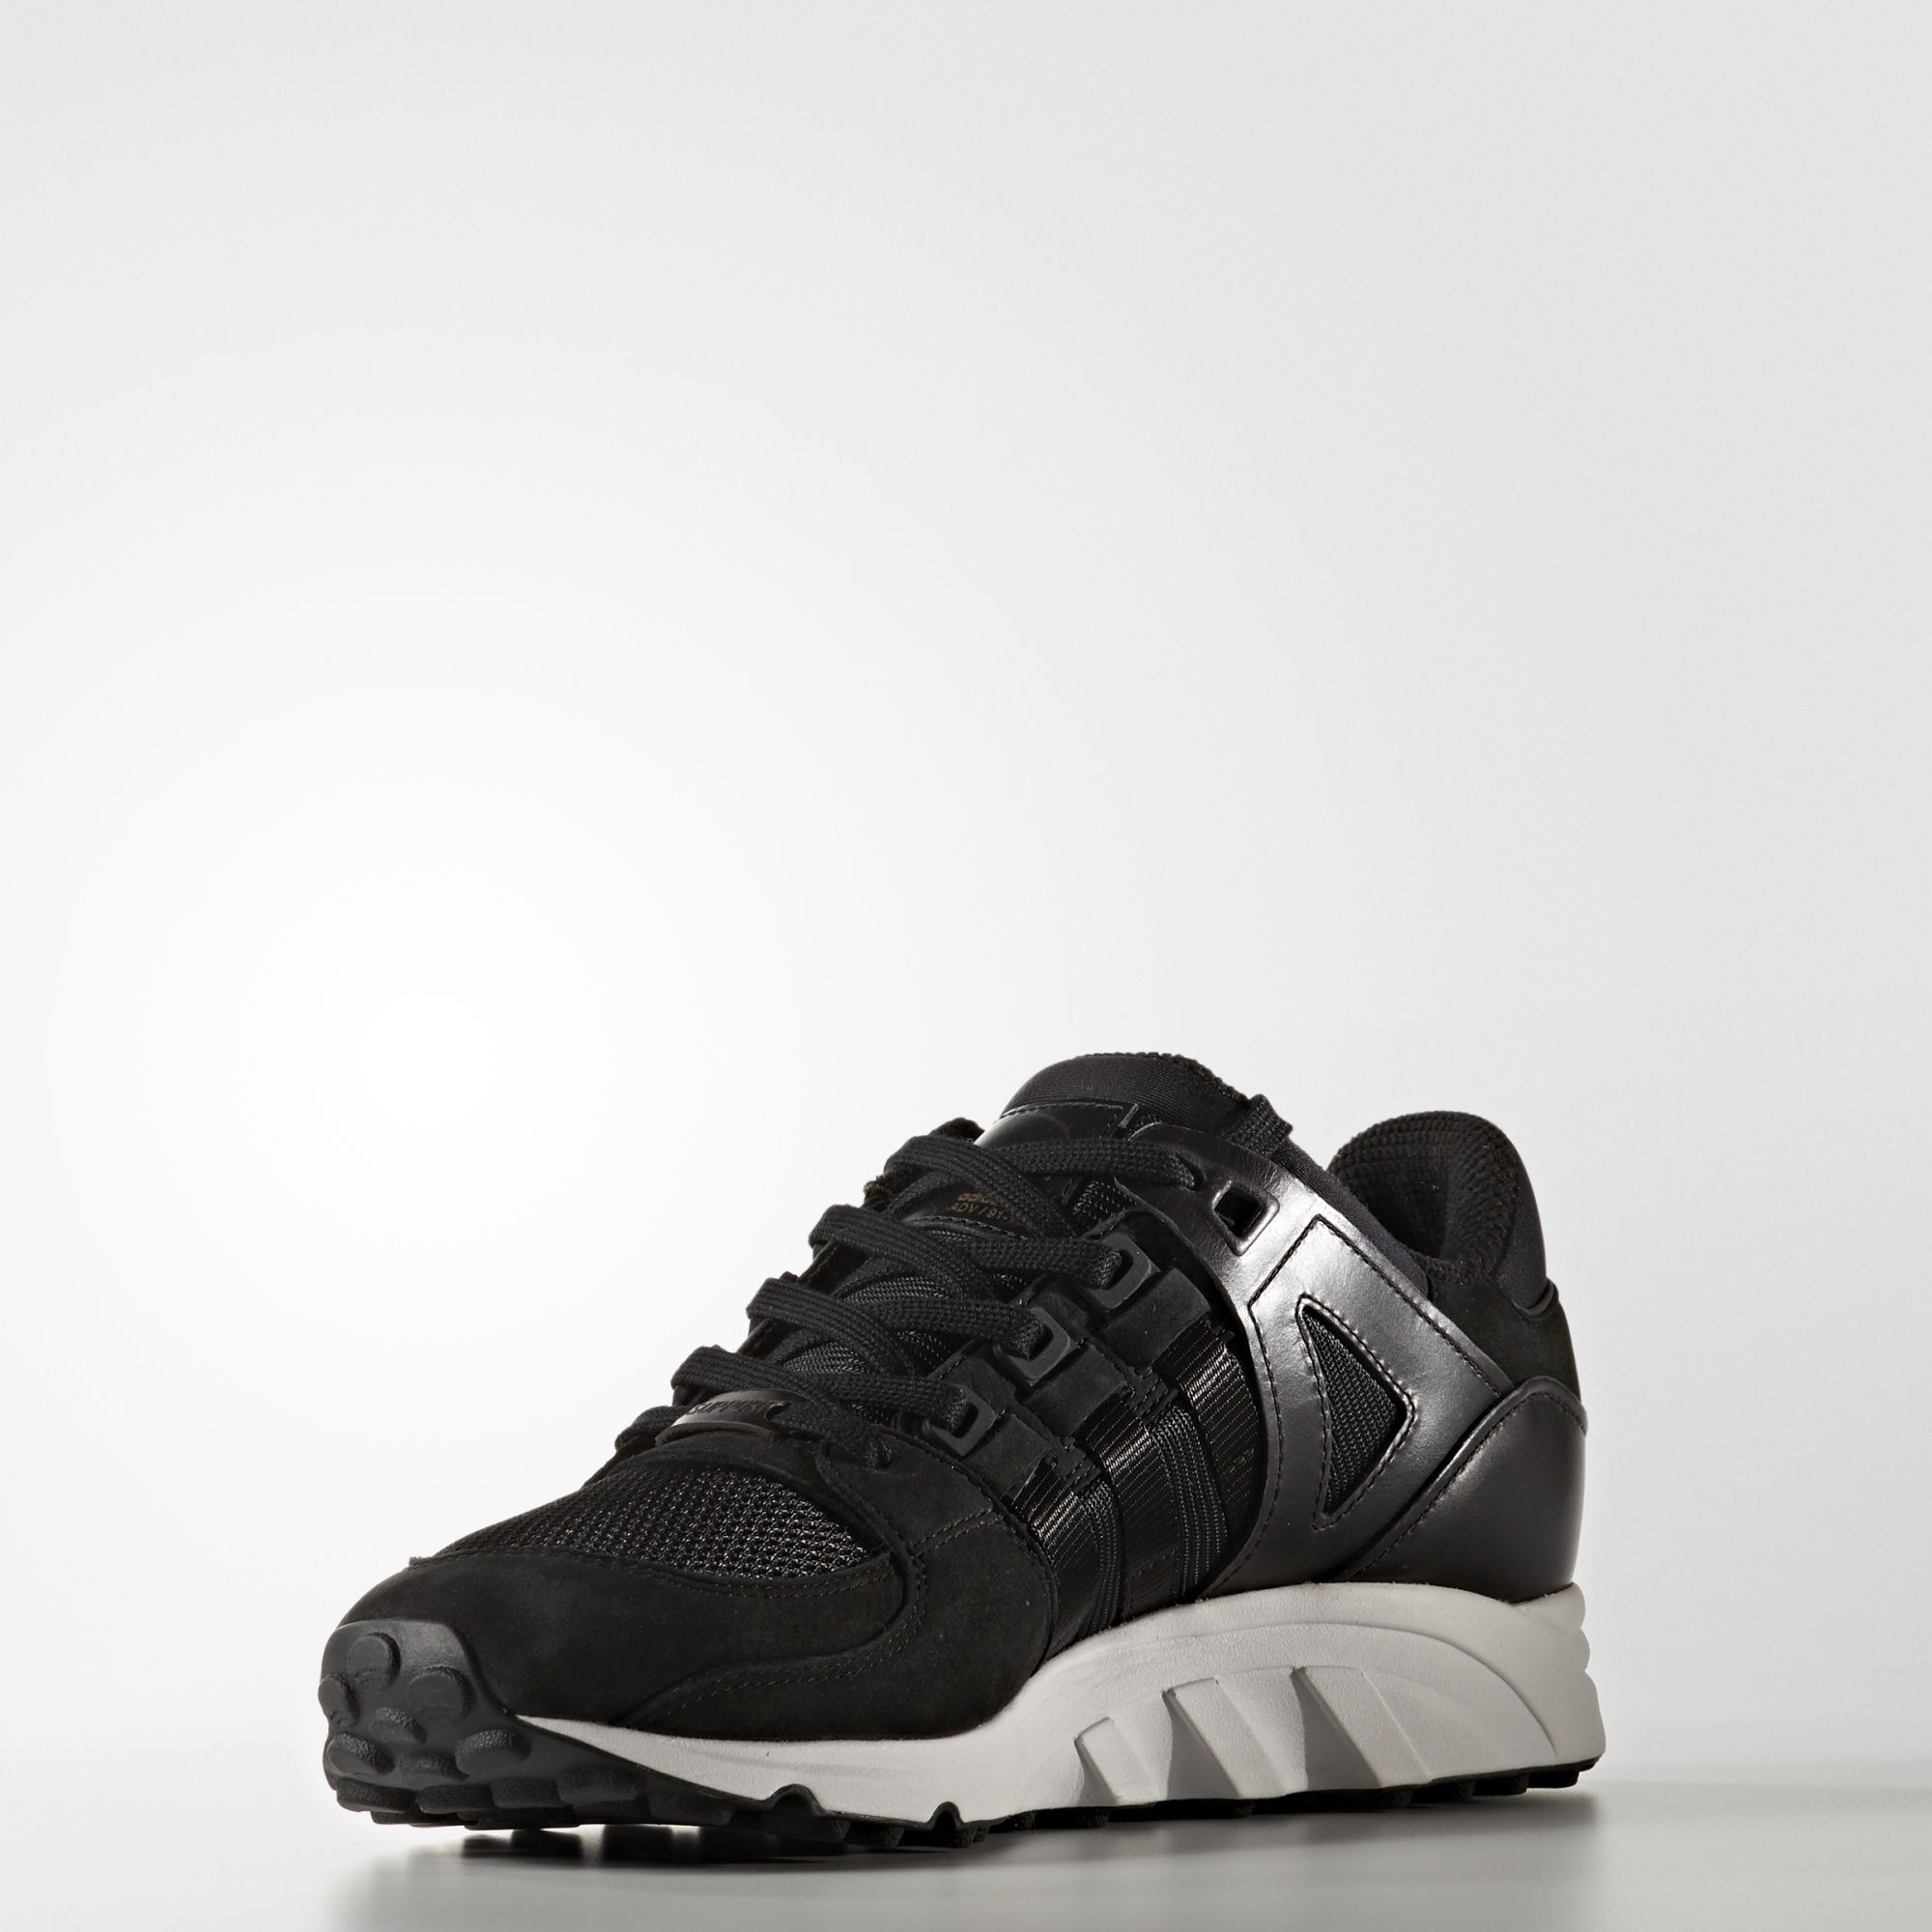 adidas-eqt-support-rf-milled-leather-pack-3